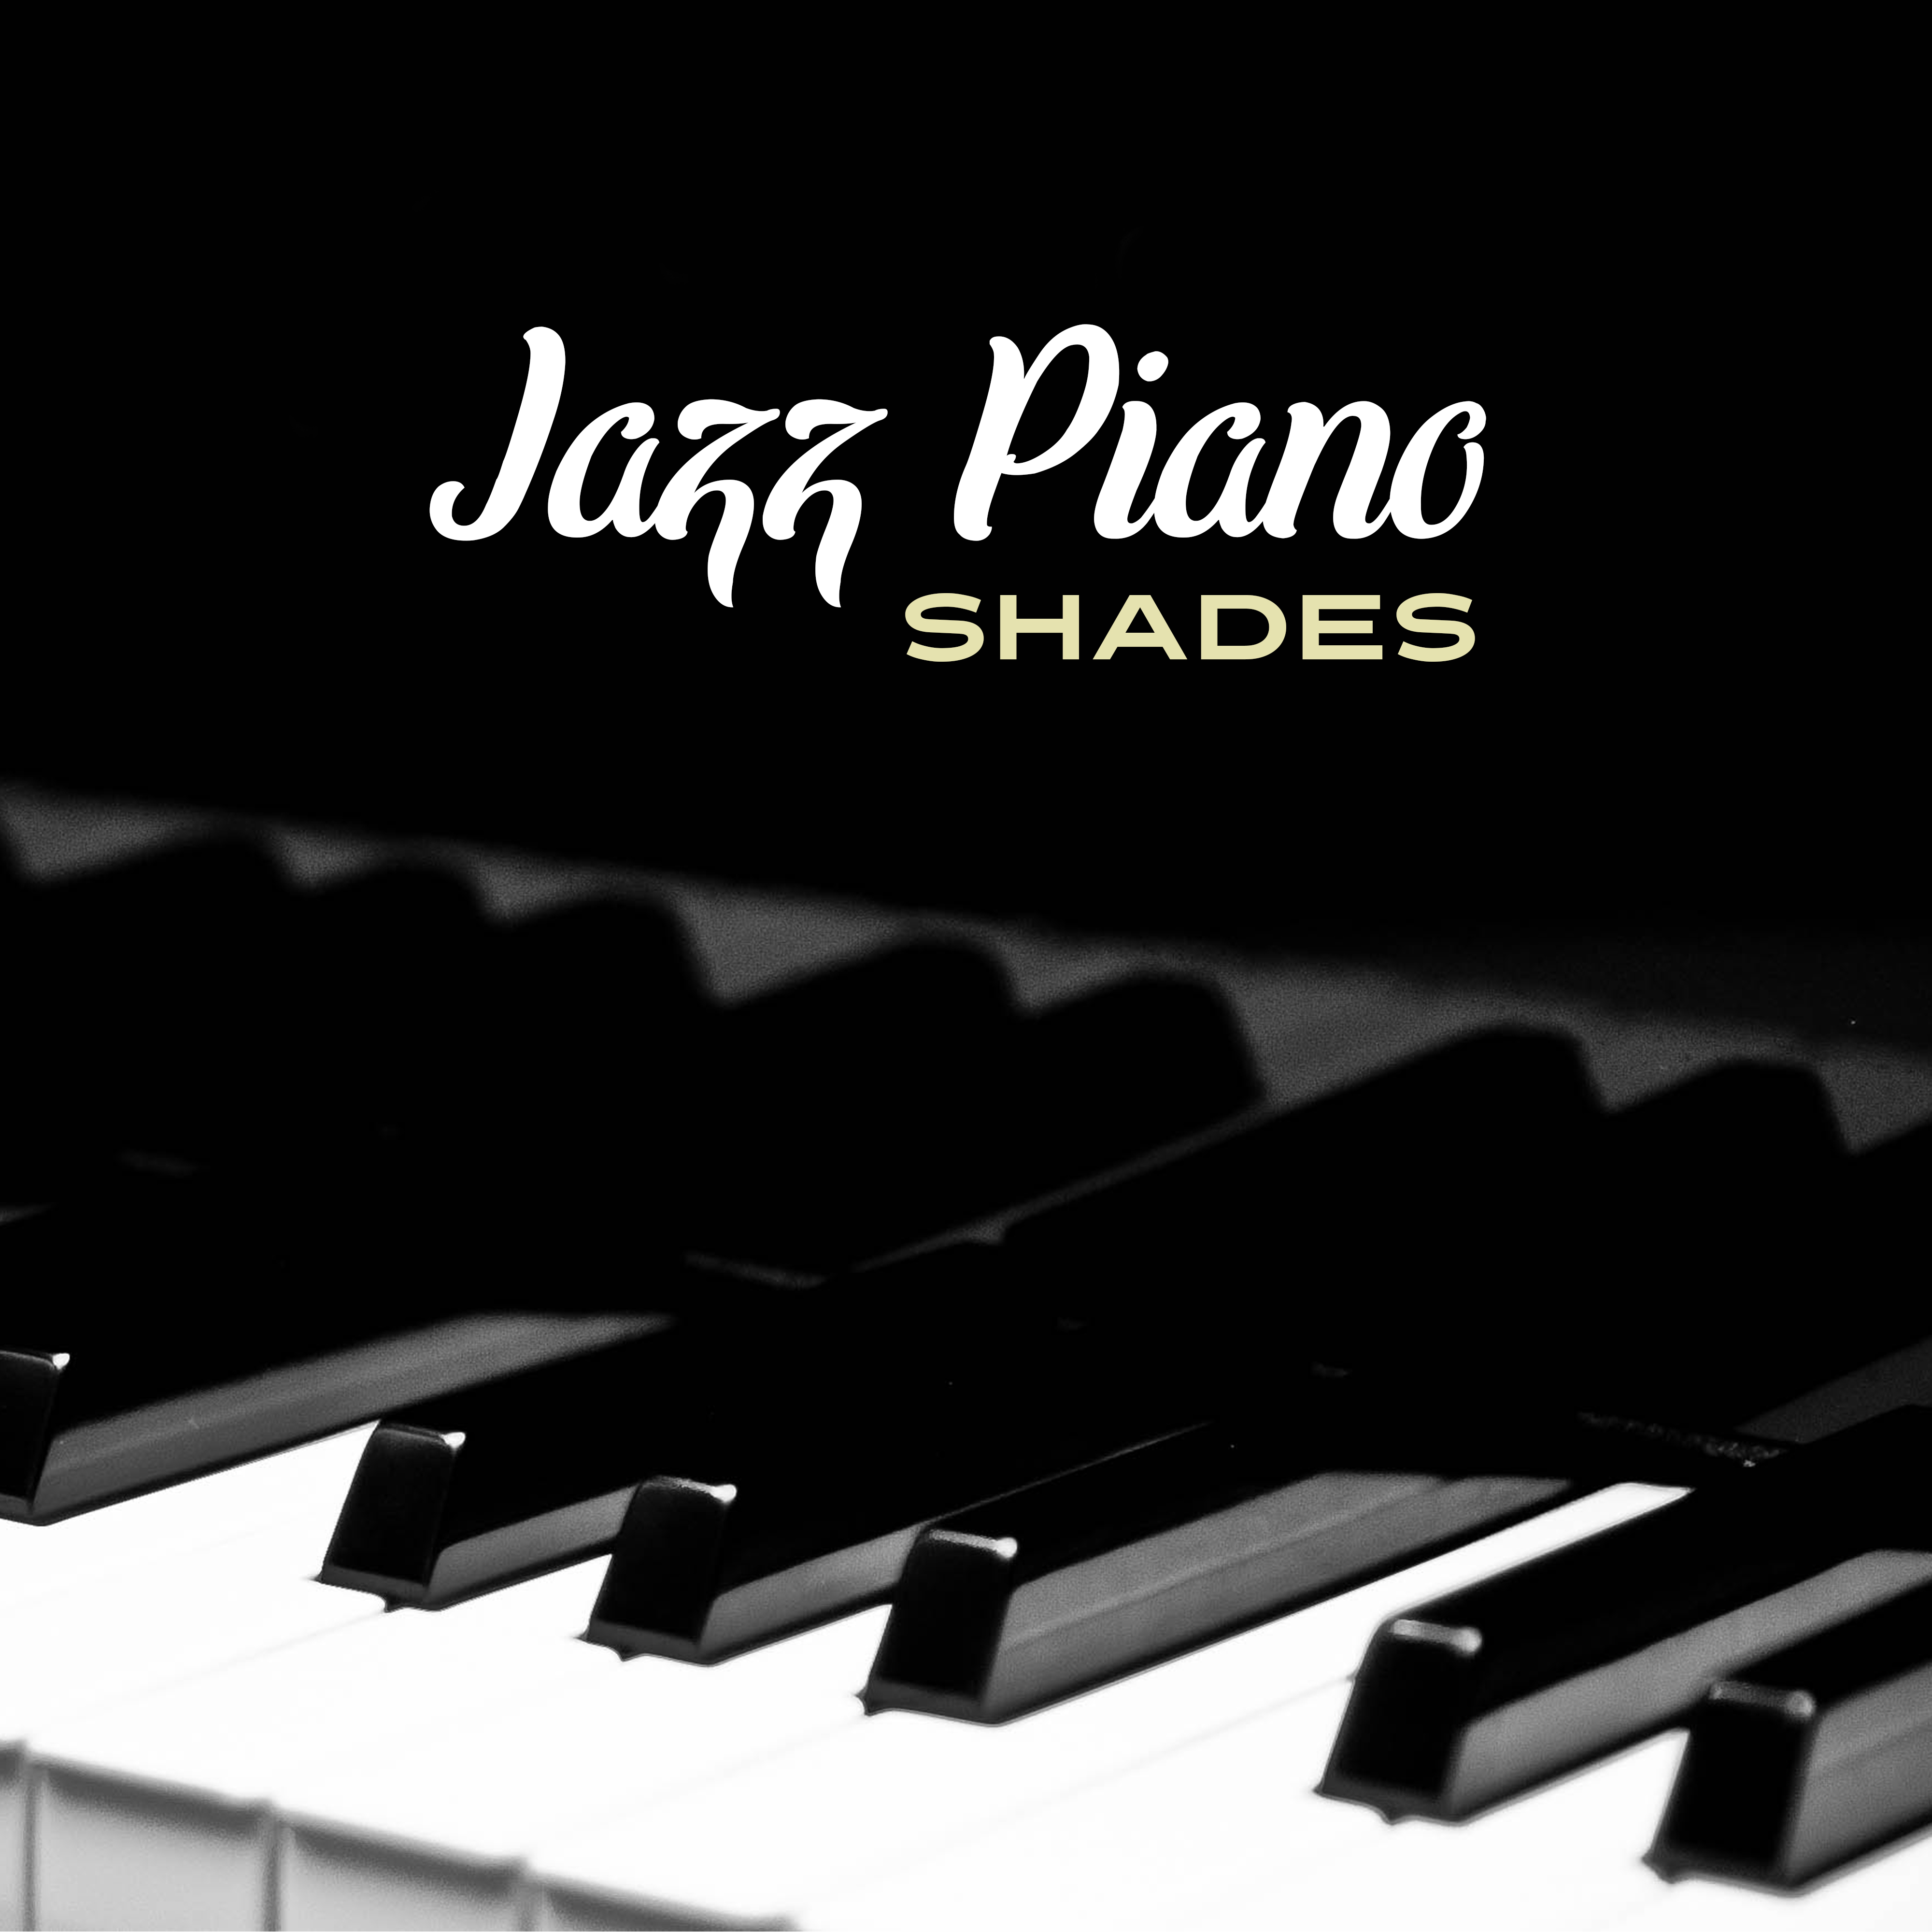 Jazz Piano Shades – Instrumental Jazz for Relaxation, Chilled Jazz, Soothing Sounds for Listening, Pure Sleep, Rest, Anti Stress Music